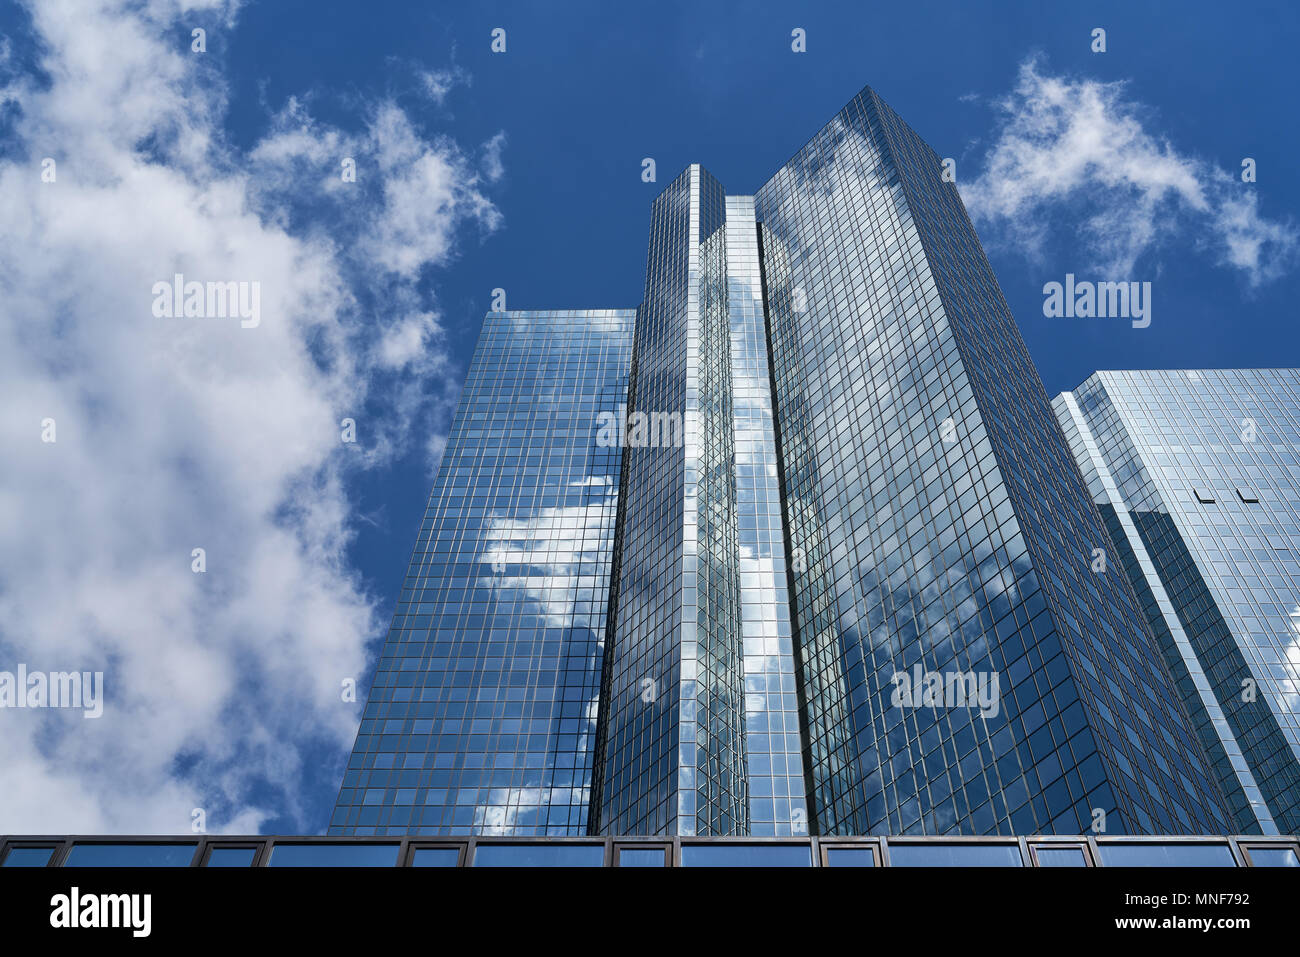 Modern business architecture in Frankfurt am Main with glass facades Stock Photo